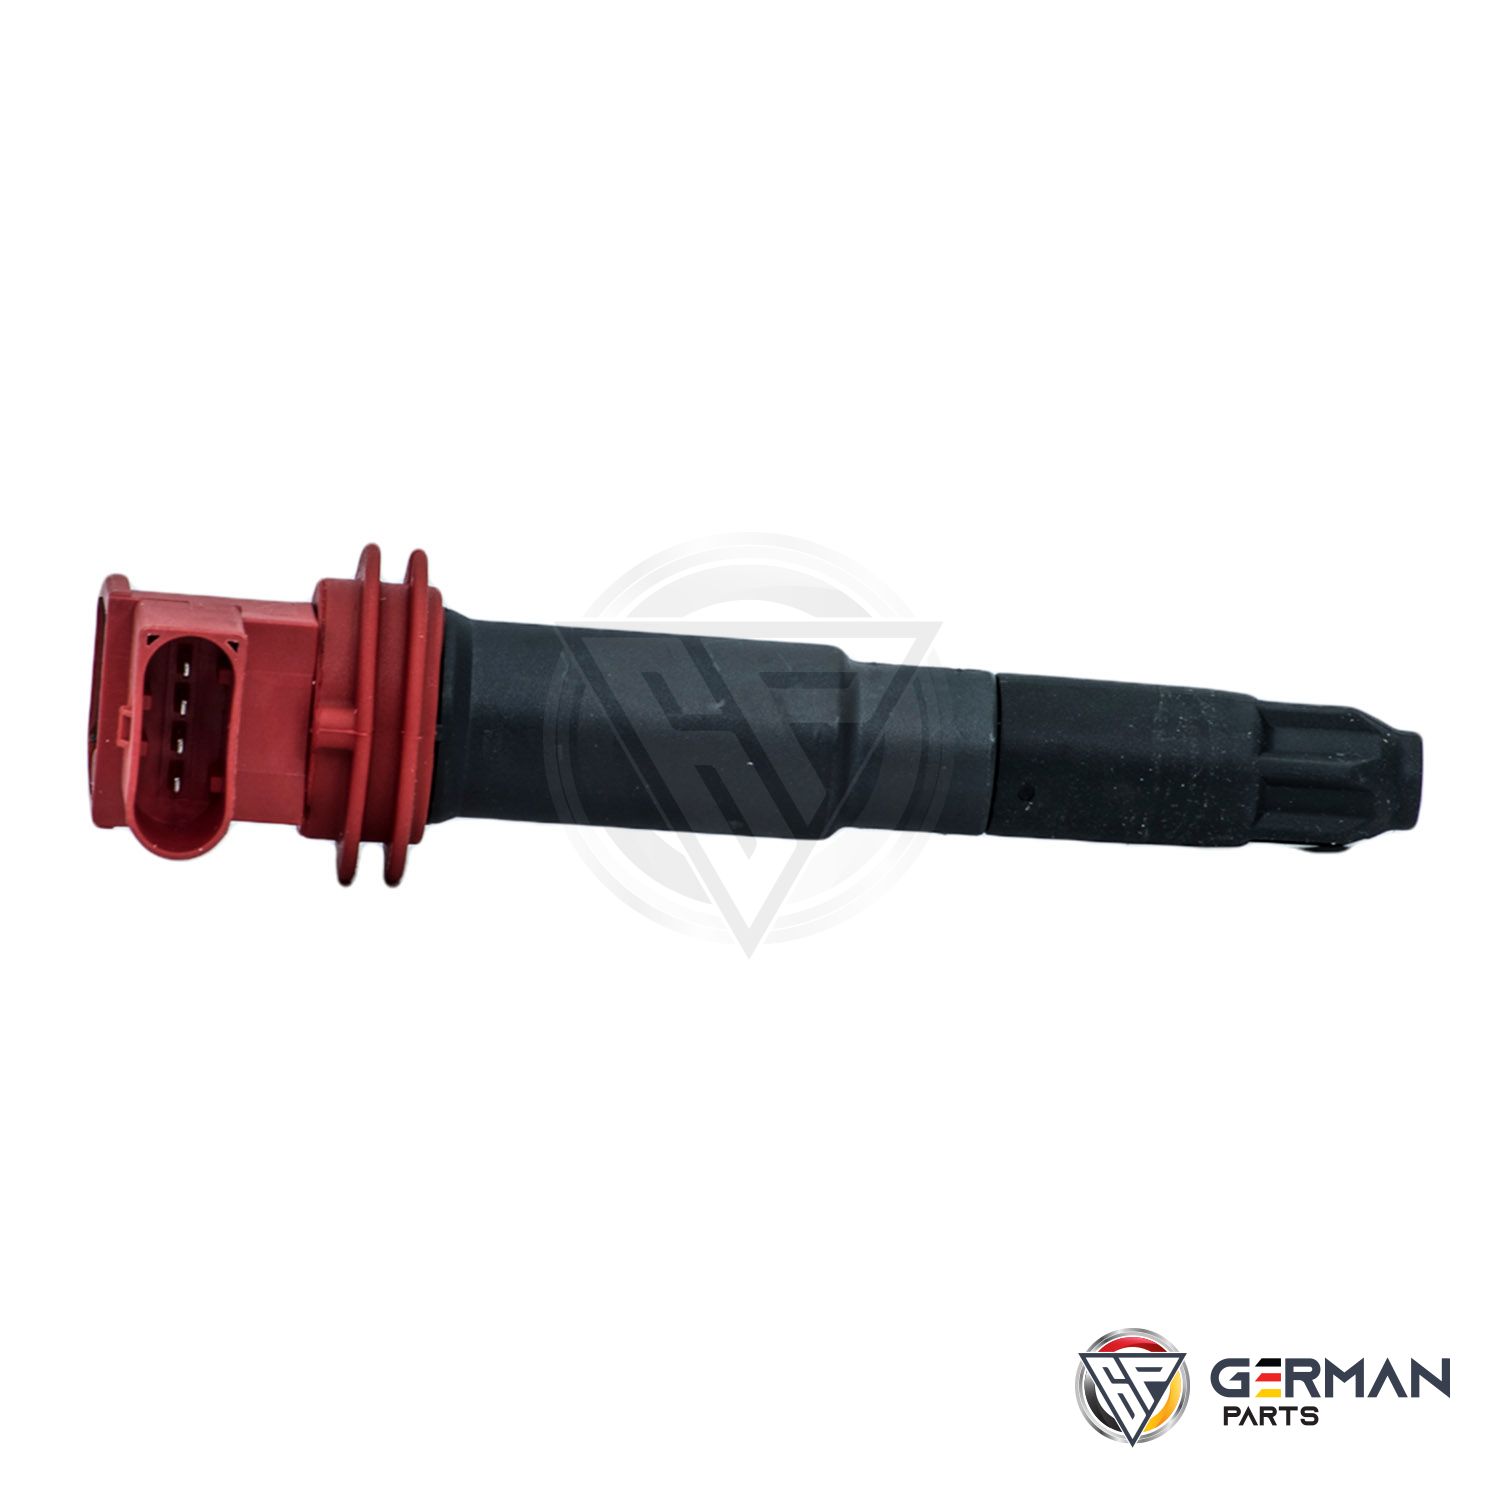 Buy Bremi Ignition Coil 94860210412 - German Parts